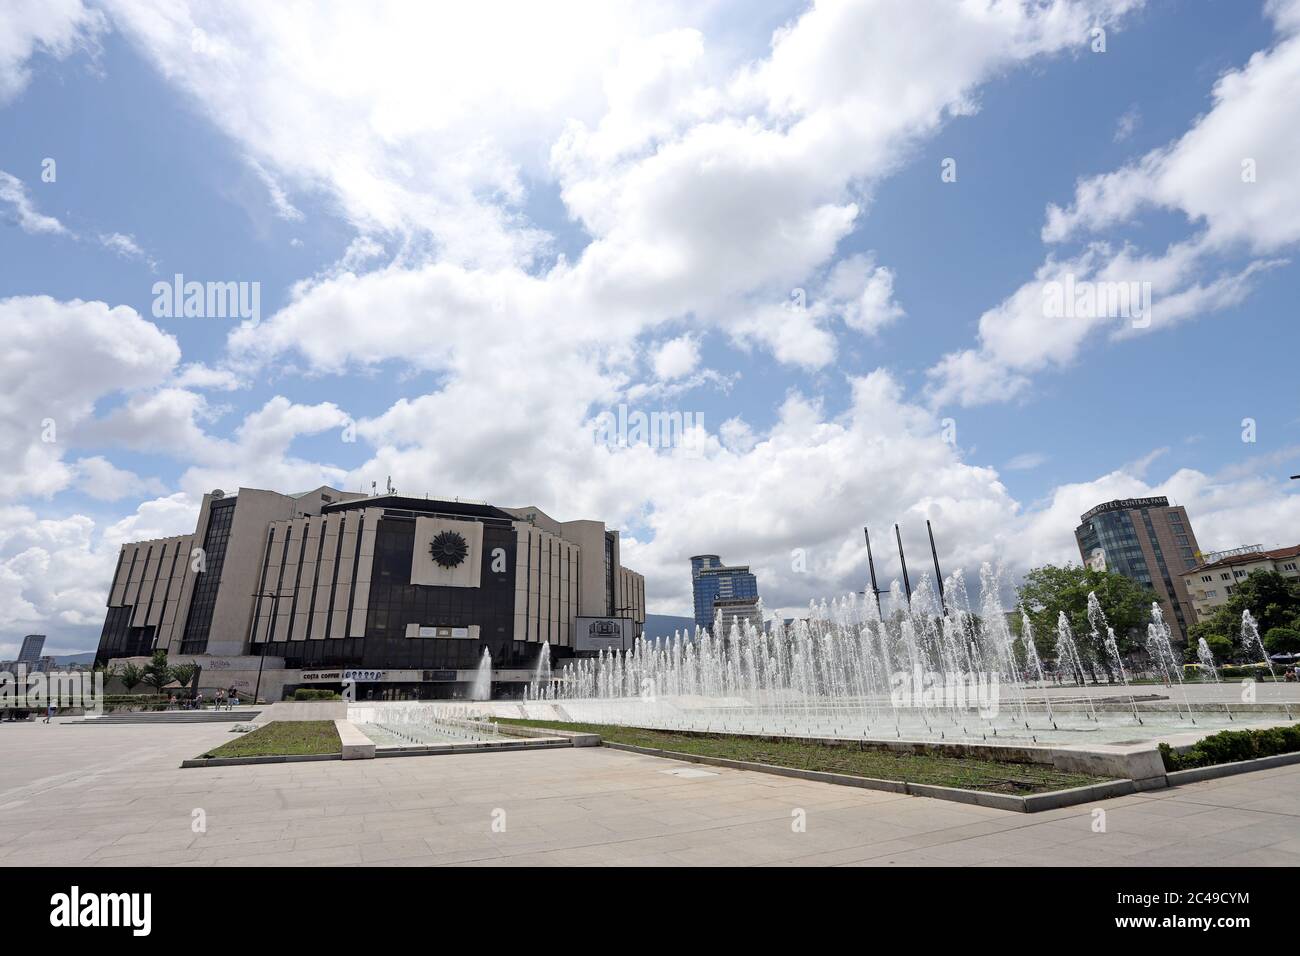 National palace of culture ( NDK ) with fountains in front , with blue sky and clouds, in Sofia, Bulgaria on june 22, 2020 Stock Photo